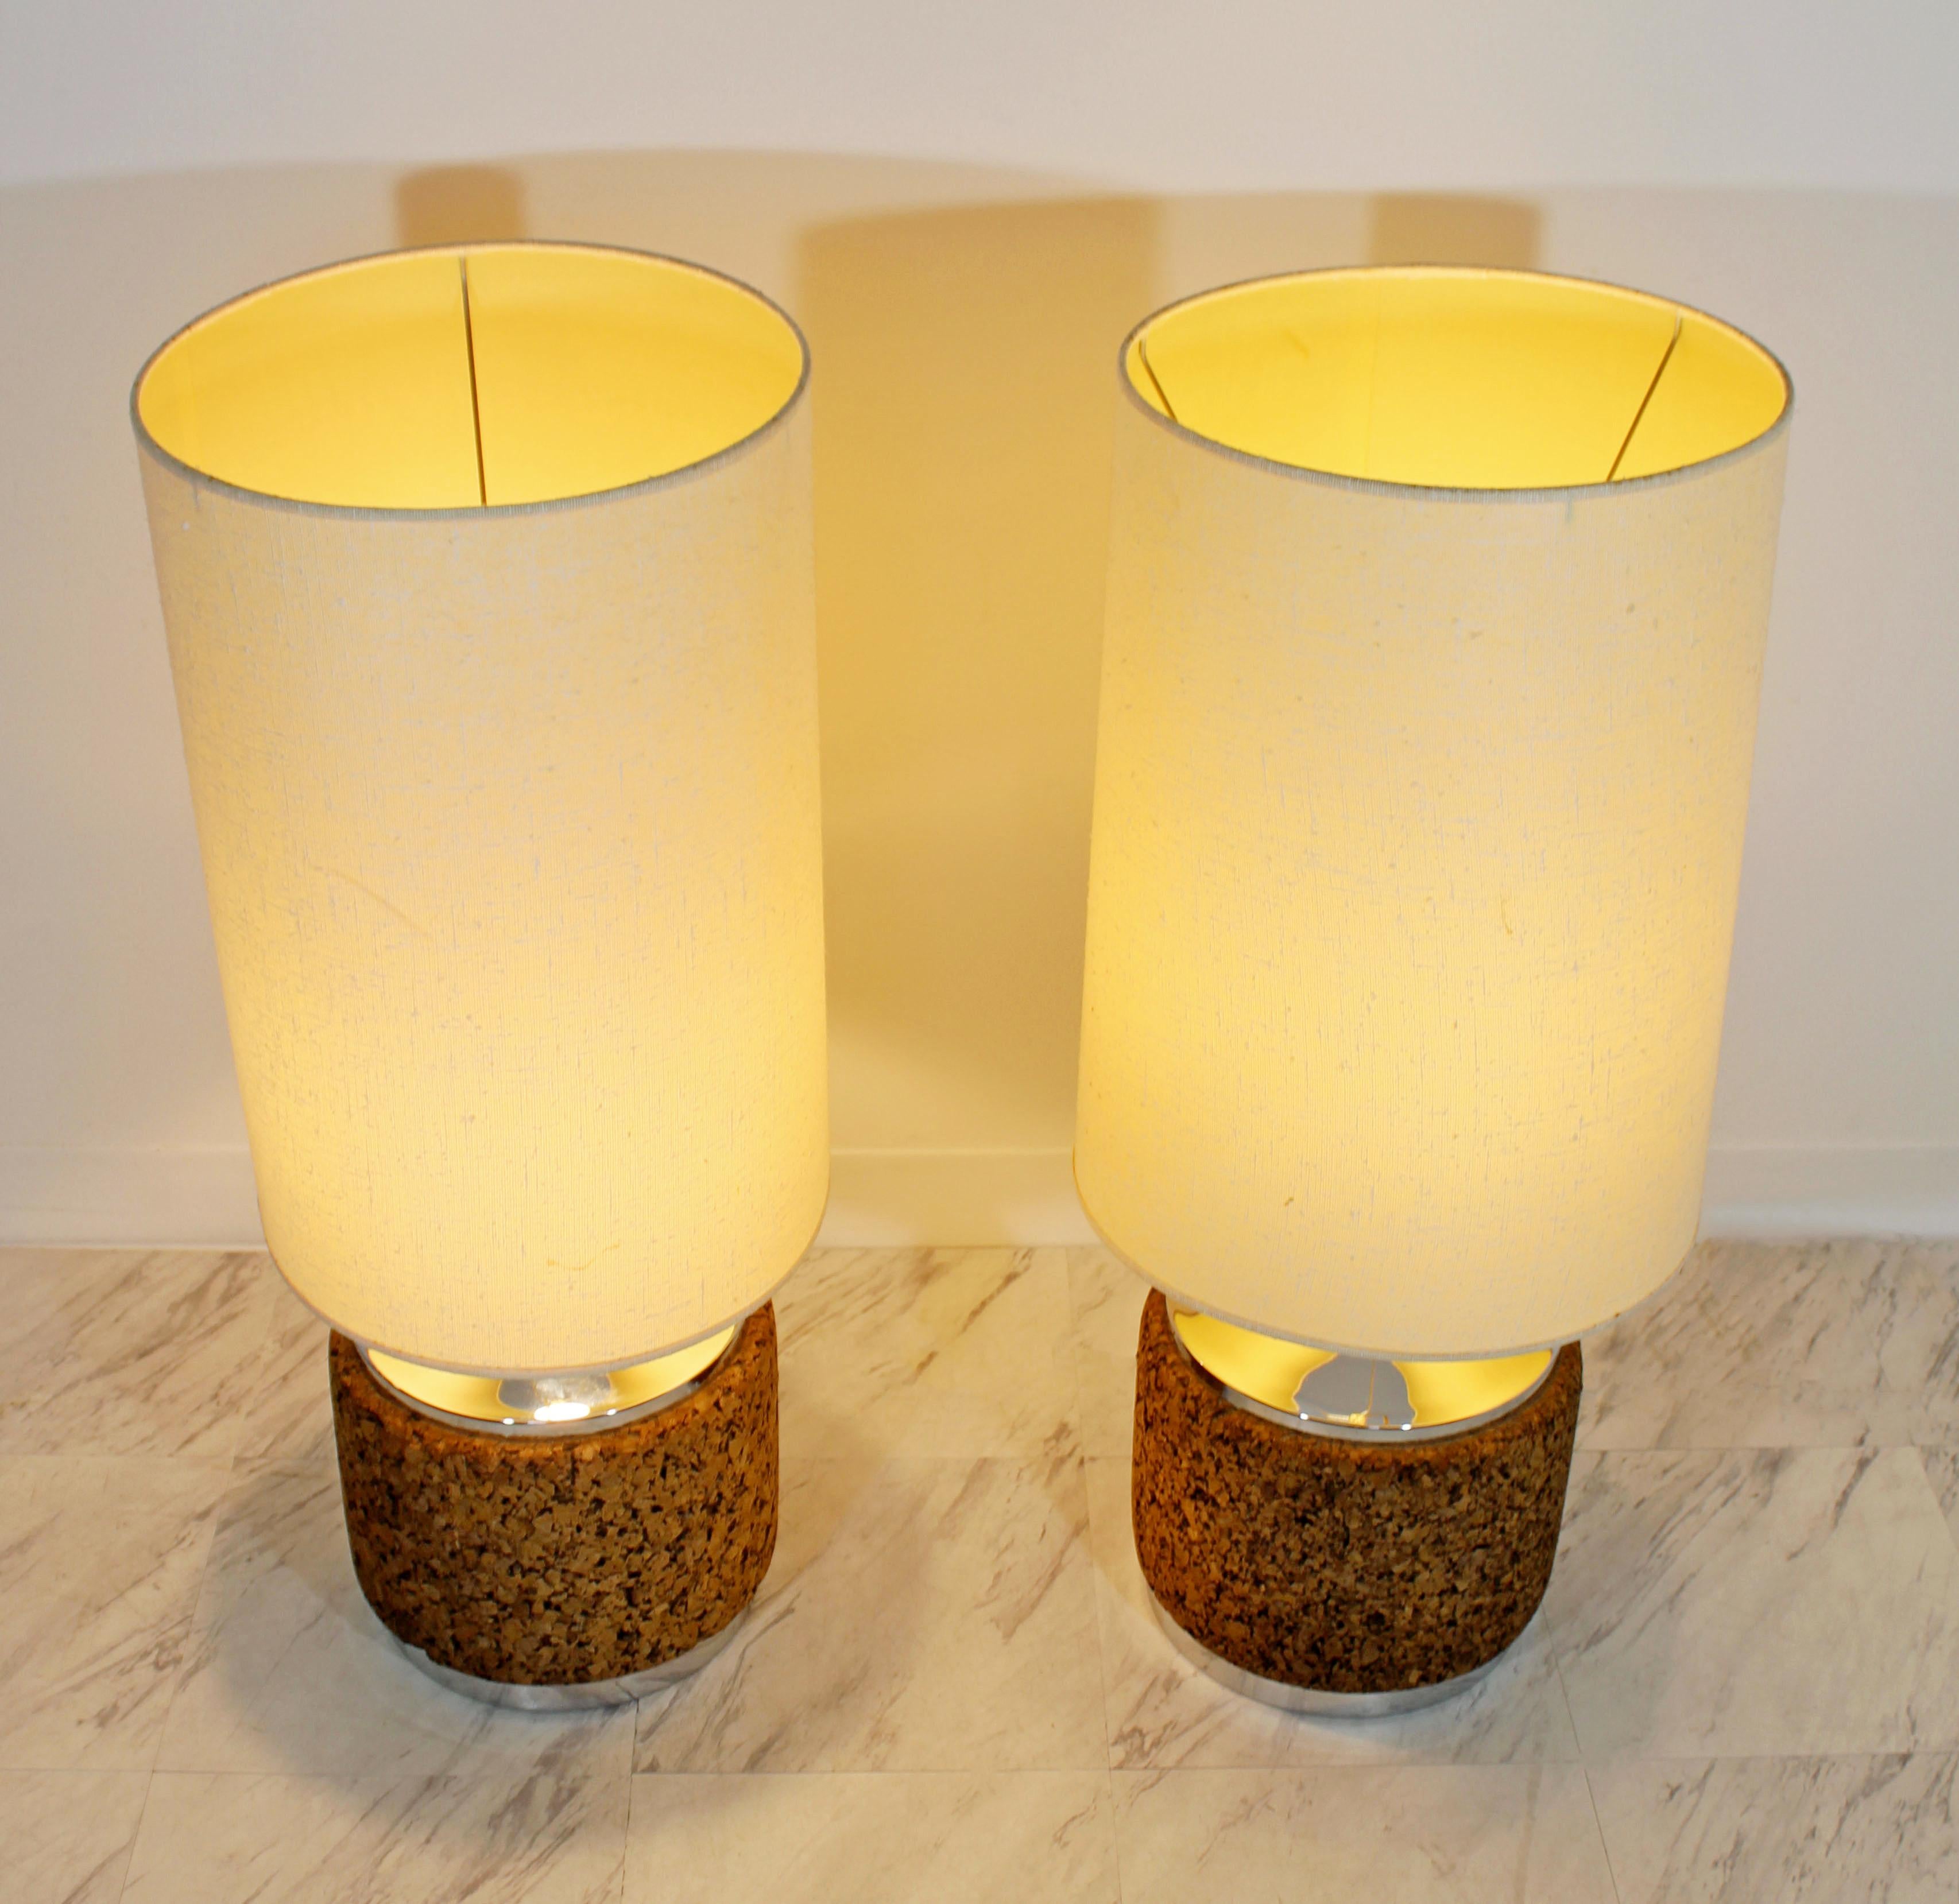 For your consideration is a unique pair of cork drum table lamps, with chrome bases and tops and original brass finials, circa the 1970s. In excellent condition. The dimensions of the lamps are 11